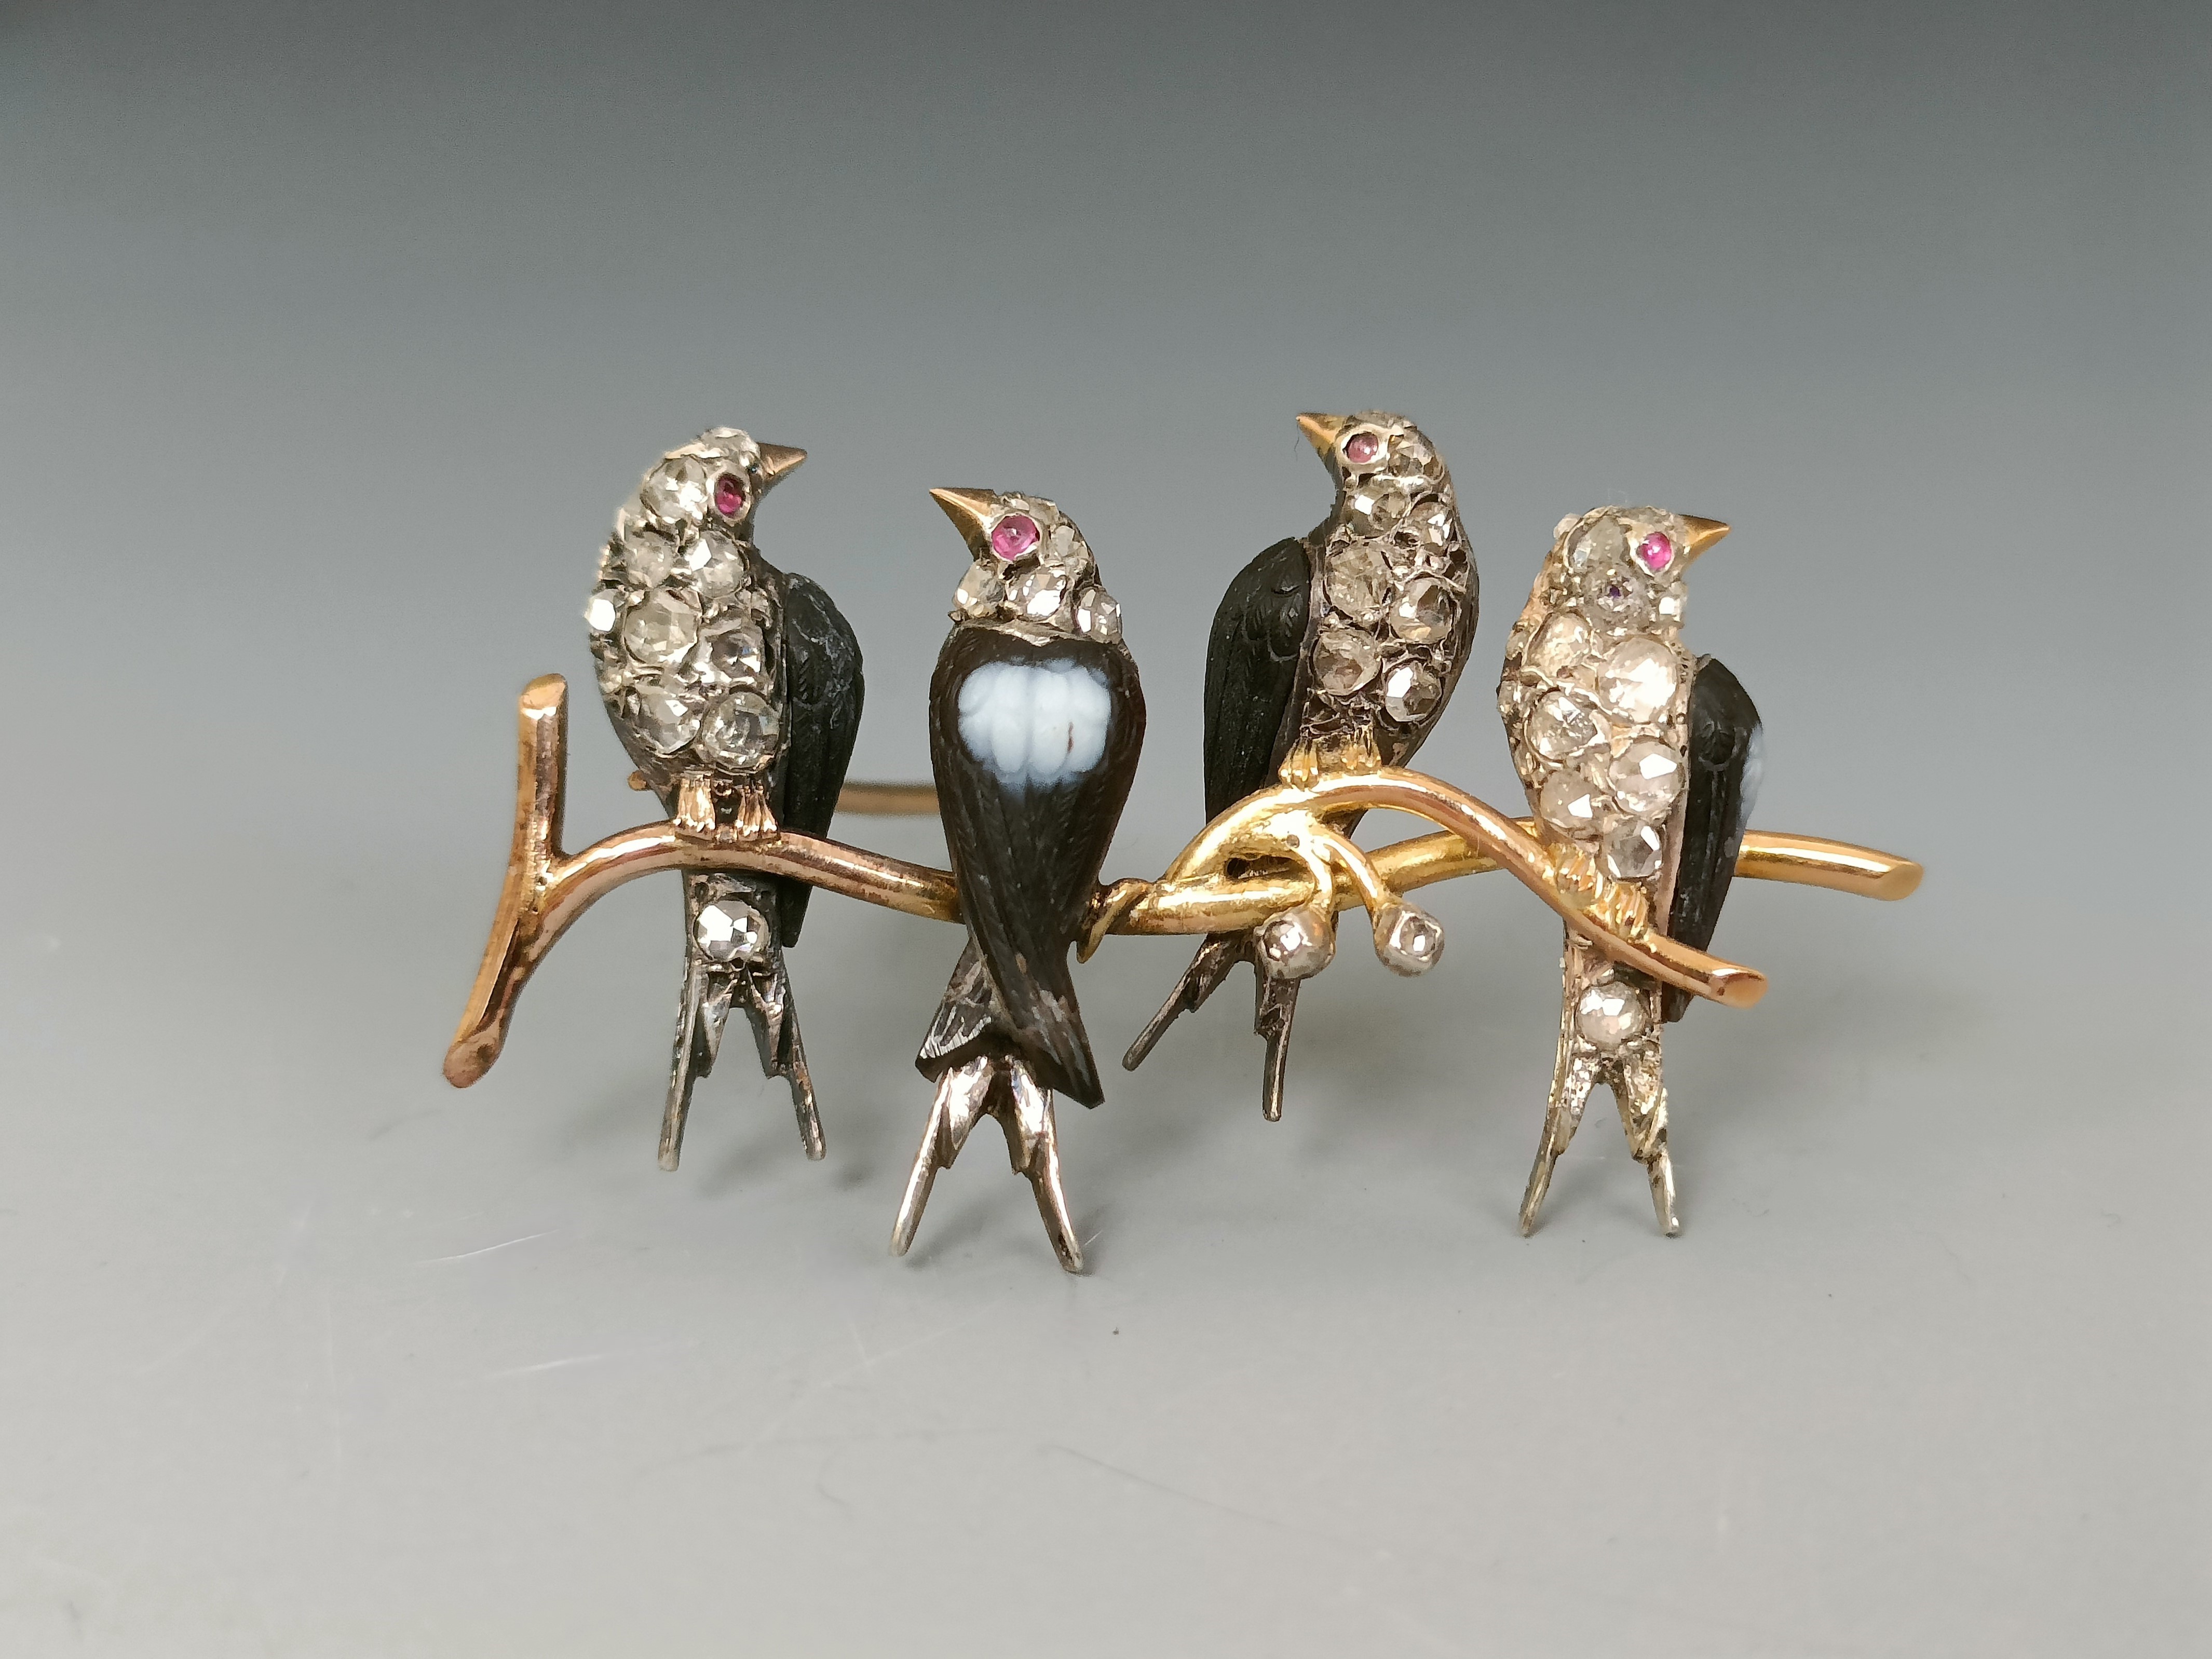 A brooch, four birds perched on a branch